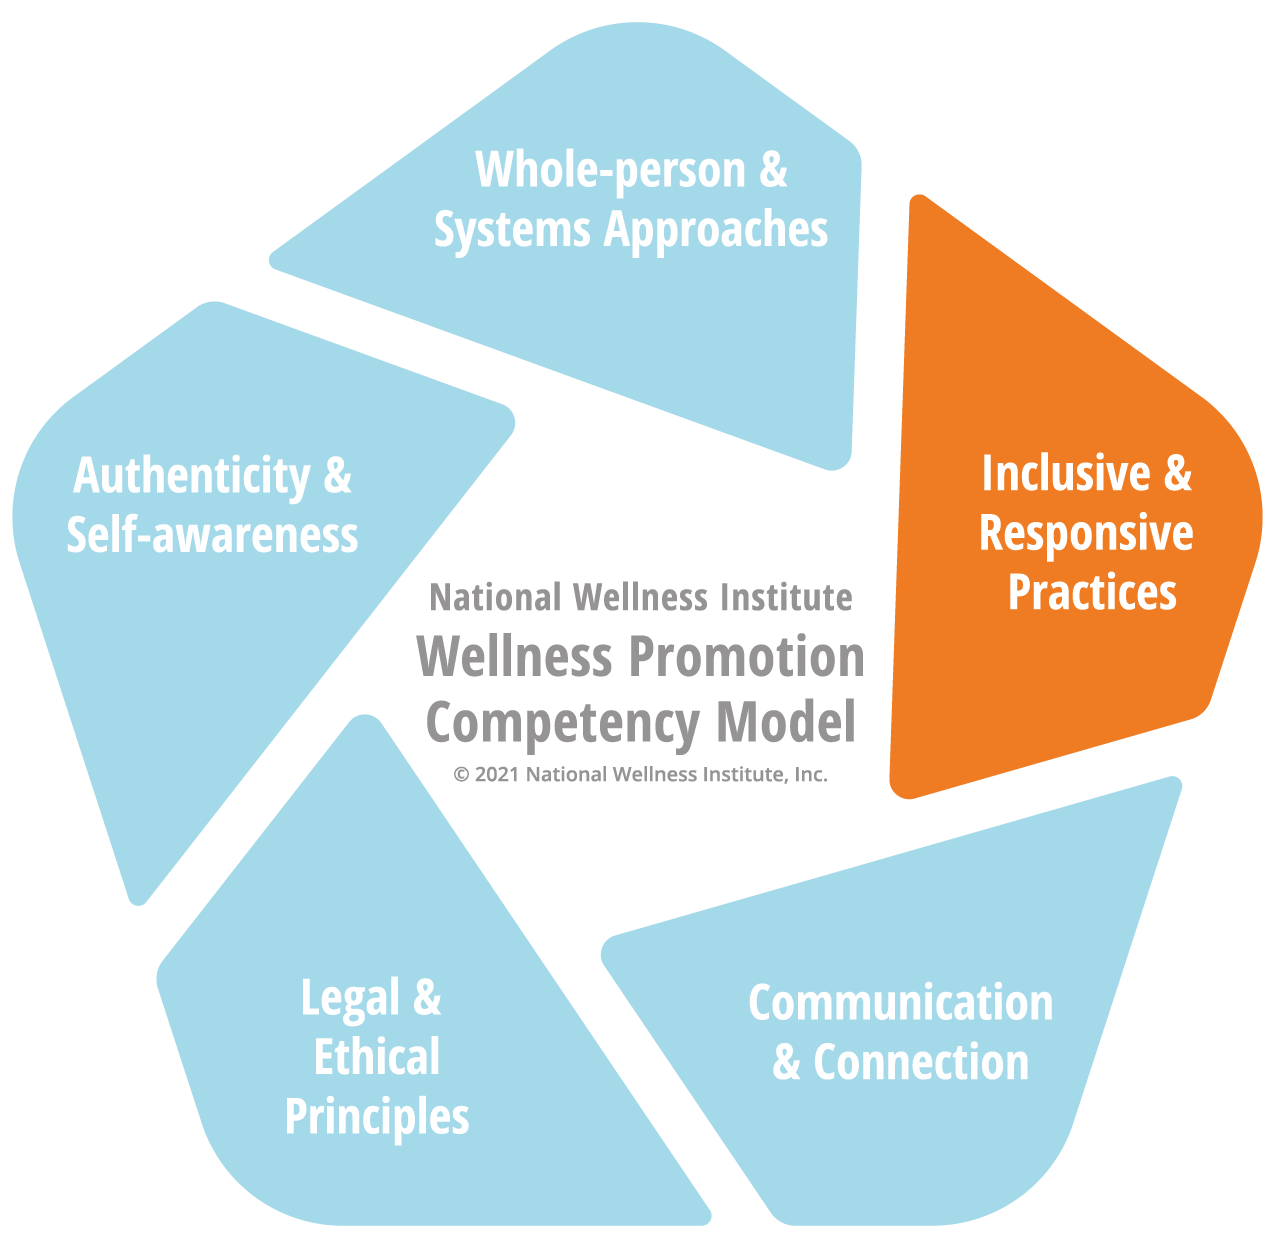 DOMAIN 3: Inclusive and Responsive Practices